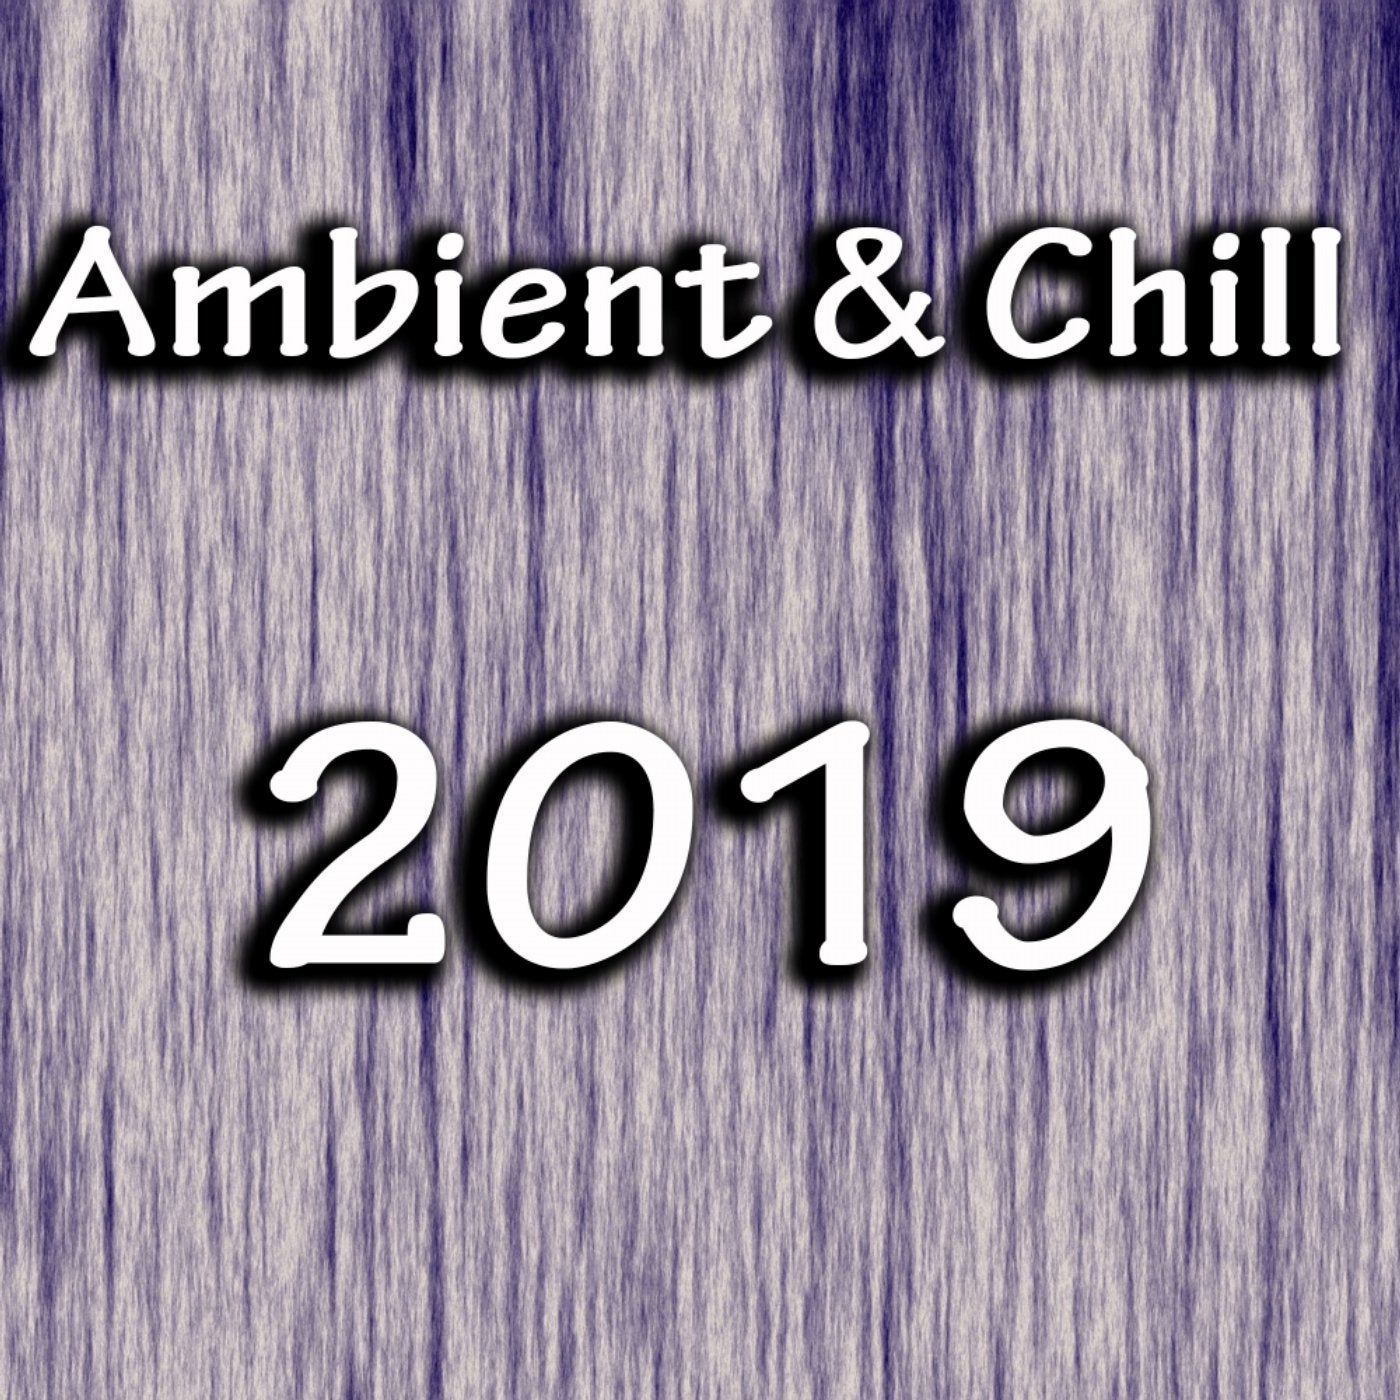 Ambient & Chill 2019